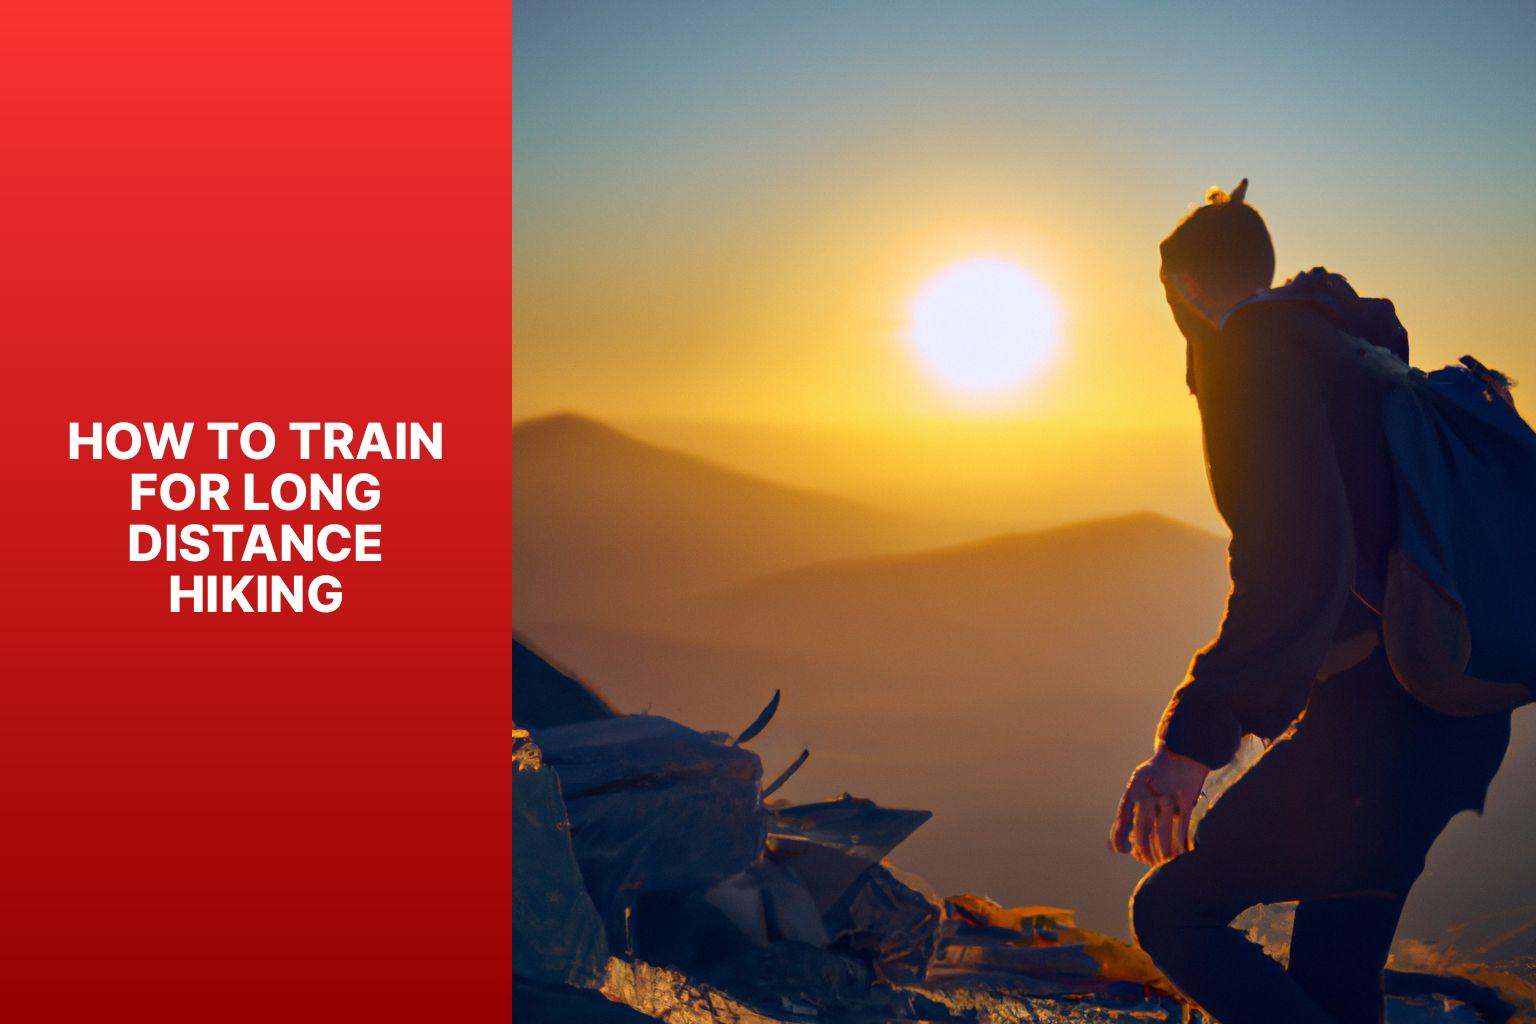 how to train for long distance hiking6trr